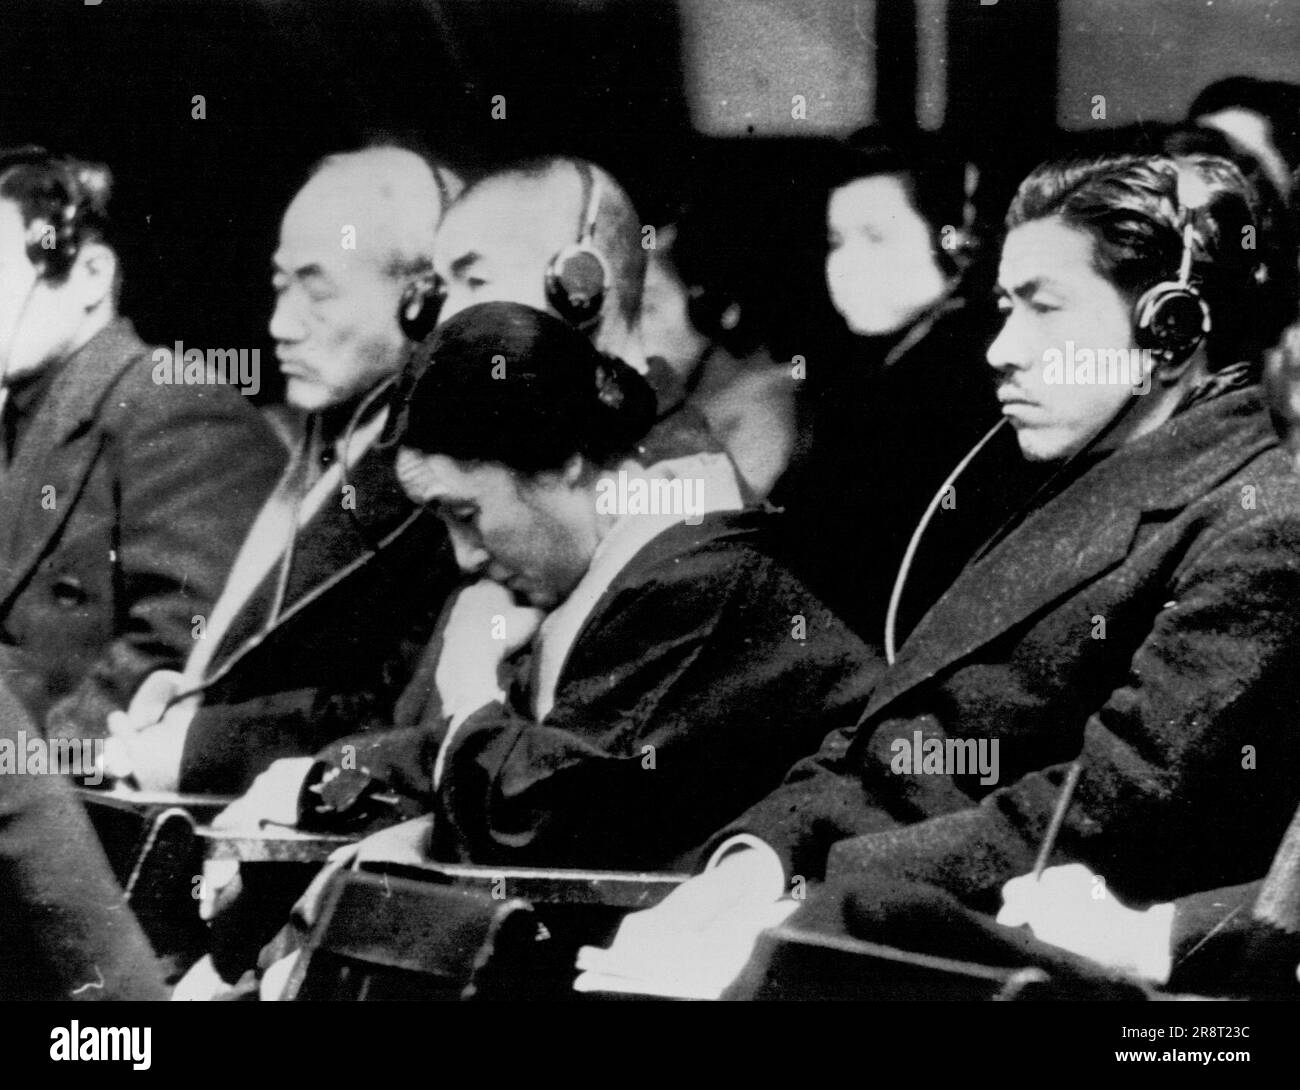 Tojo Weeps at Husband's Trial -- Mrs. Hideki Tojo bows her head and weeps during the trial in Tokyo, Japan of her husband, former premier of Japan, as Tojo is questioned by the prosecution. Others in the picture are unidentified. January 04, 1948. (Photo by AP Wirephoto). Stock Photo